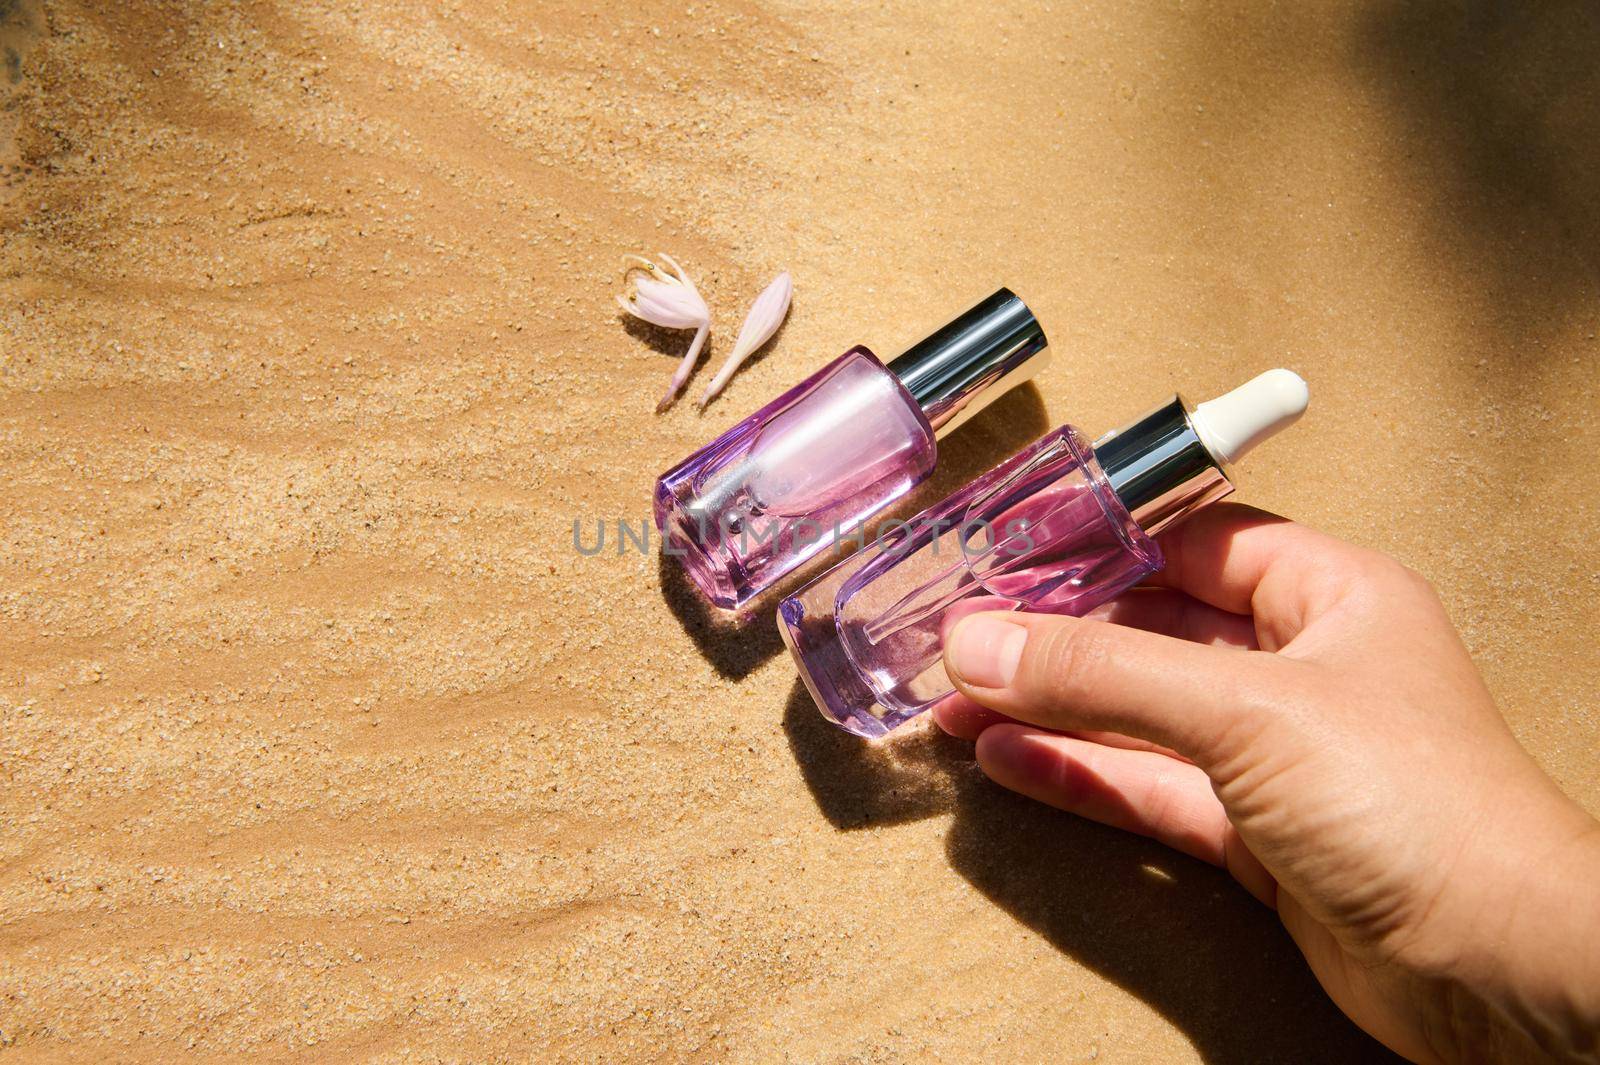 Close-up. Hand putting skin care beauty product, packaged in a light violet glass bottle on golden sand background. Advertising shot of nourishing, rejuvenating, anti-aging cosmetics. Still life art